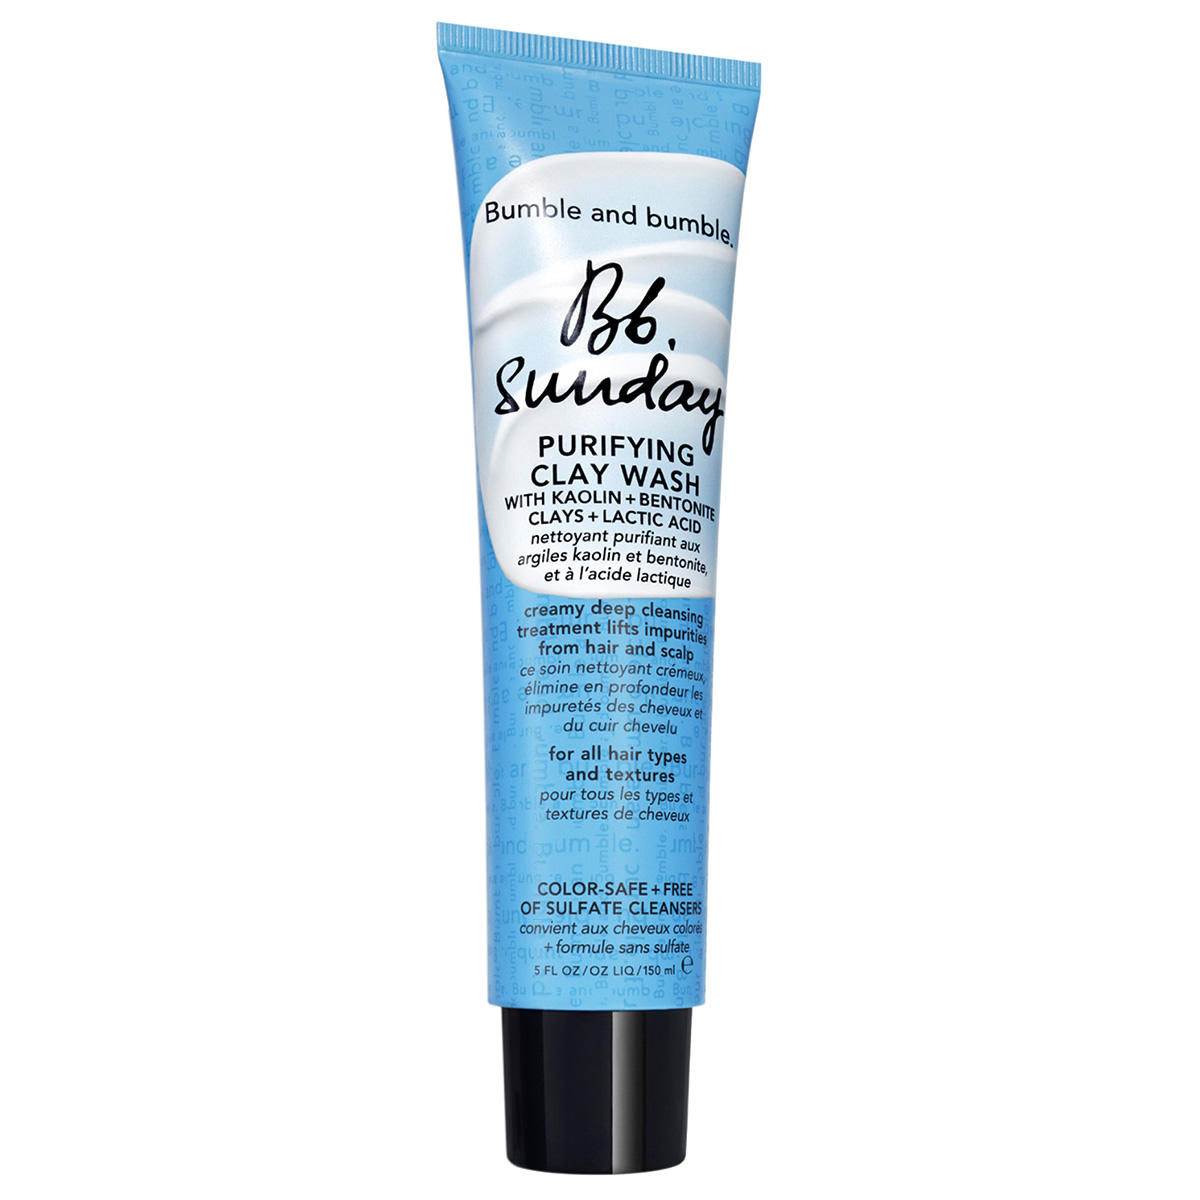 Bumble and bumble Sunday Purifying Clay Wash 150 ml - 1